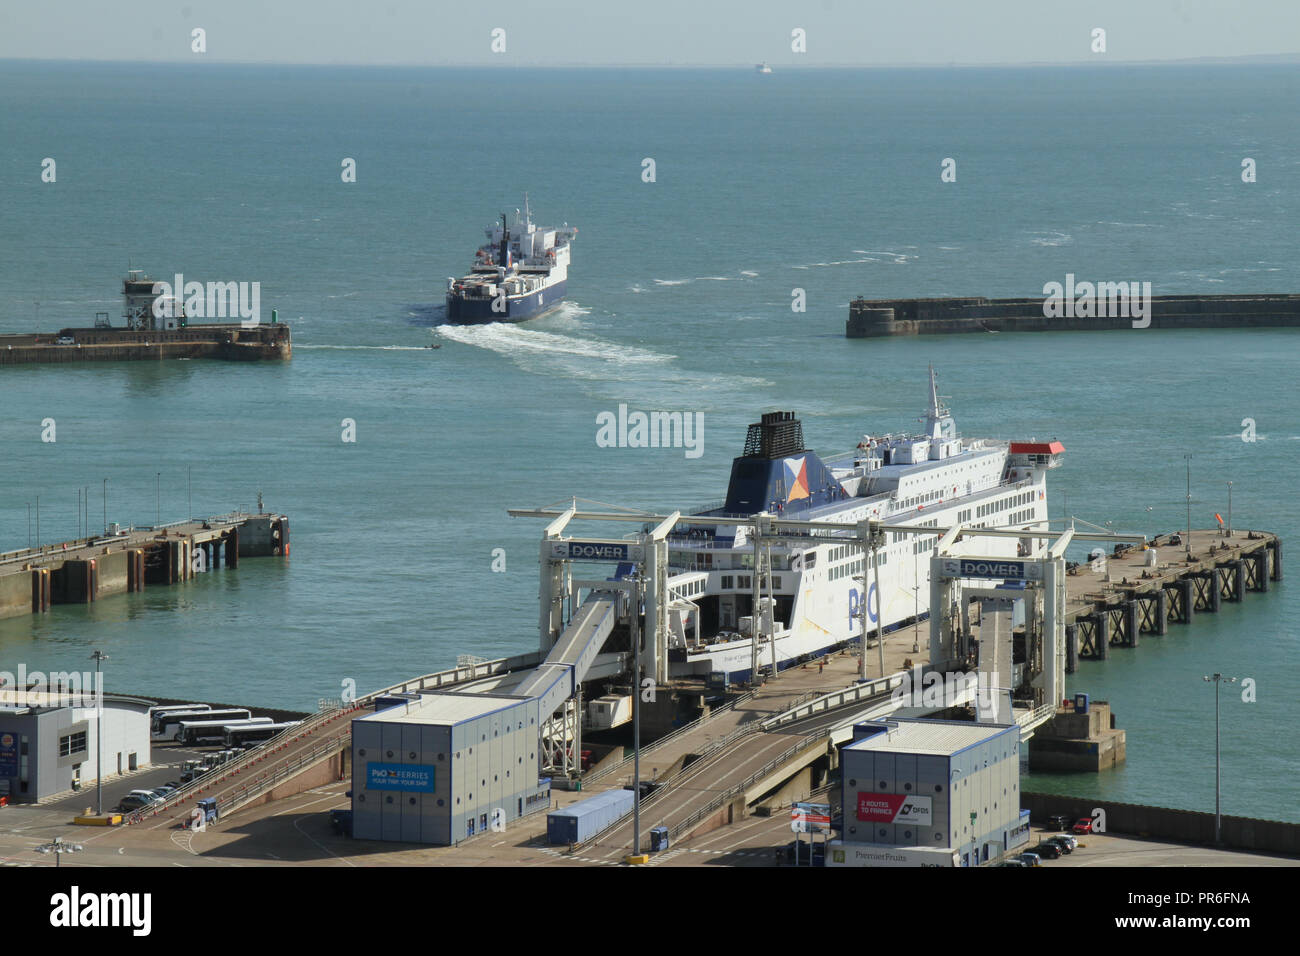 Dover, Kent, UK - September  30 2018: A ferry sails out of the port of Dover bound for Calais, France. The coastal town of Dover and the medieval Dover Castle overlooks the town from the iconic White Cliffs. . Credit: David Mbiyu Stock Photo